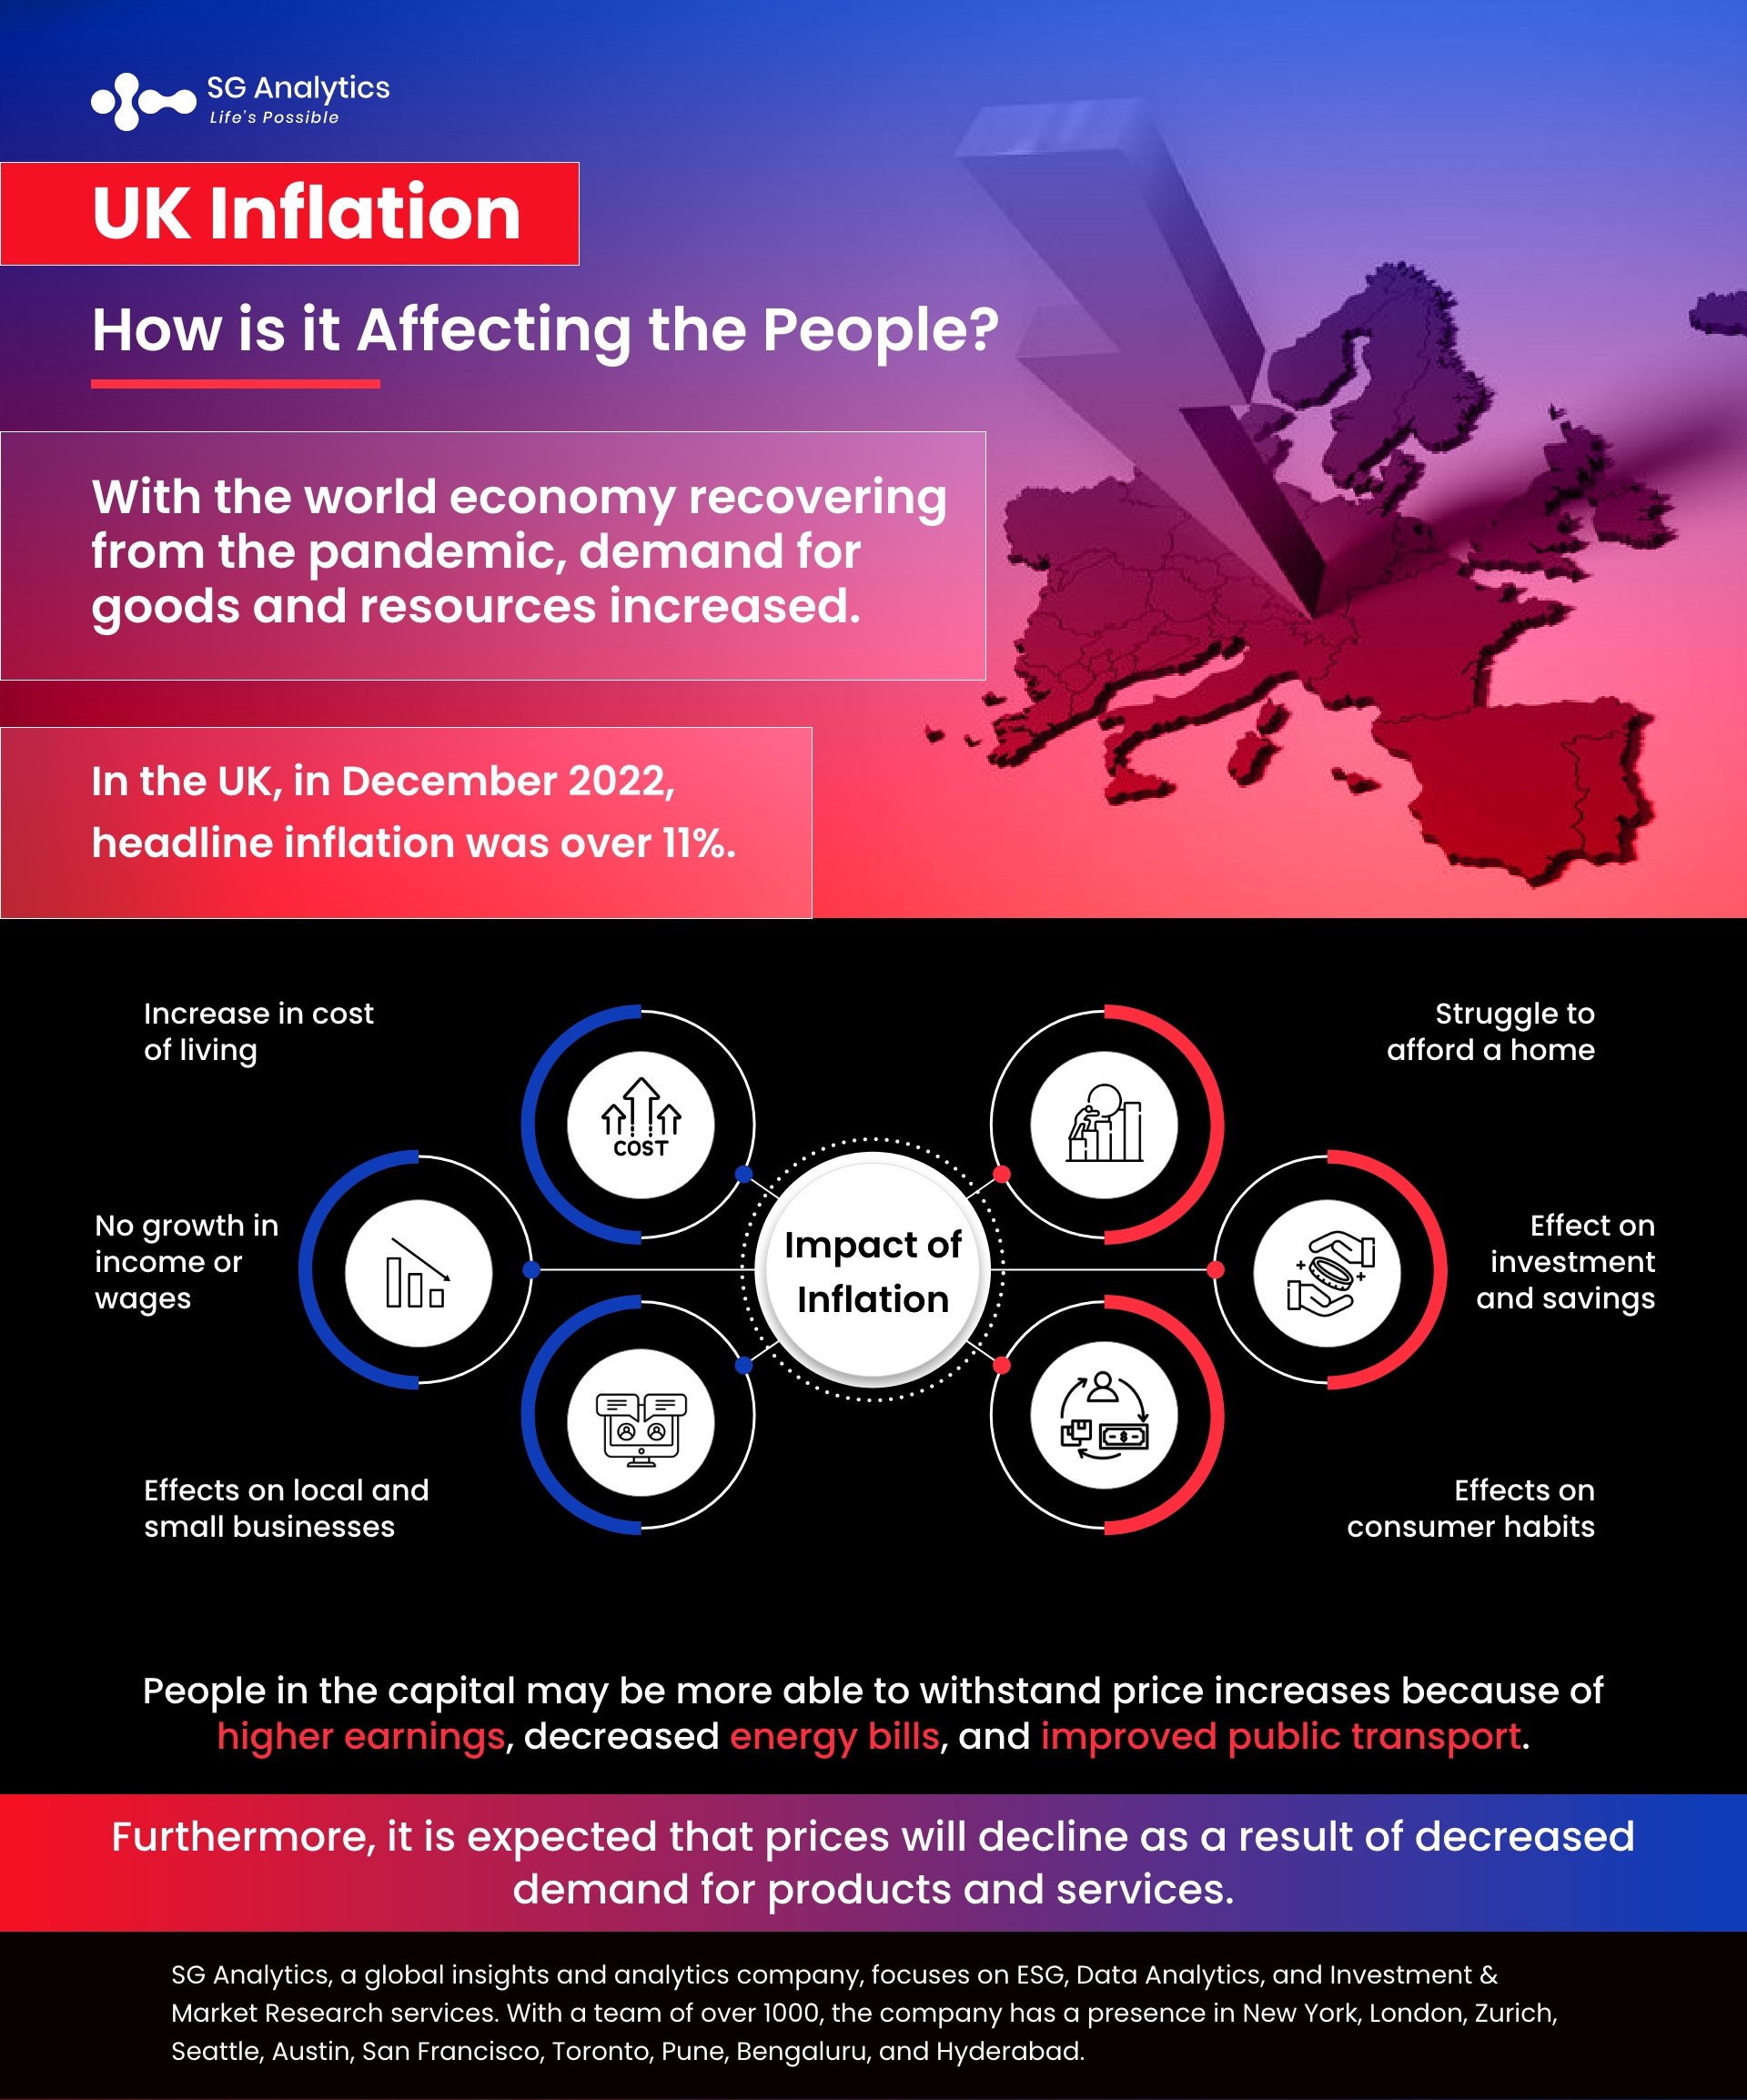 UK Inflation - How is it Affecting the People